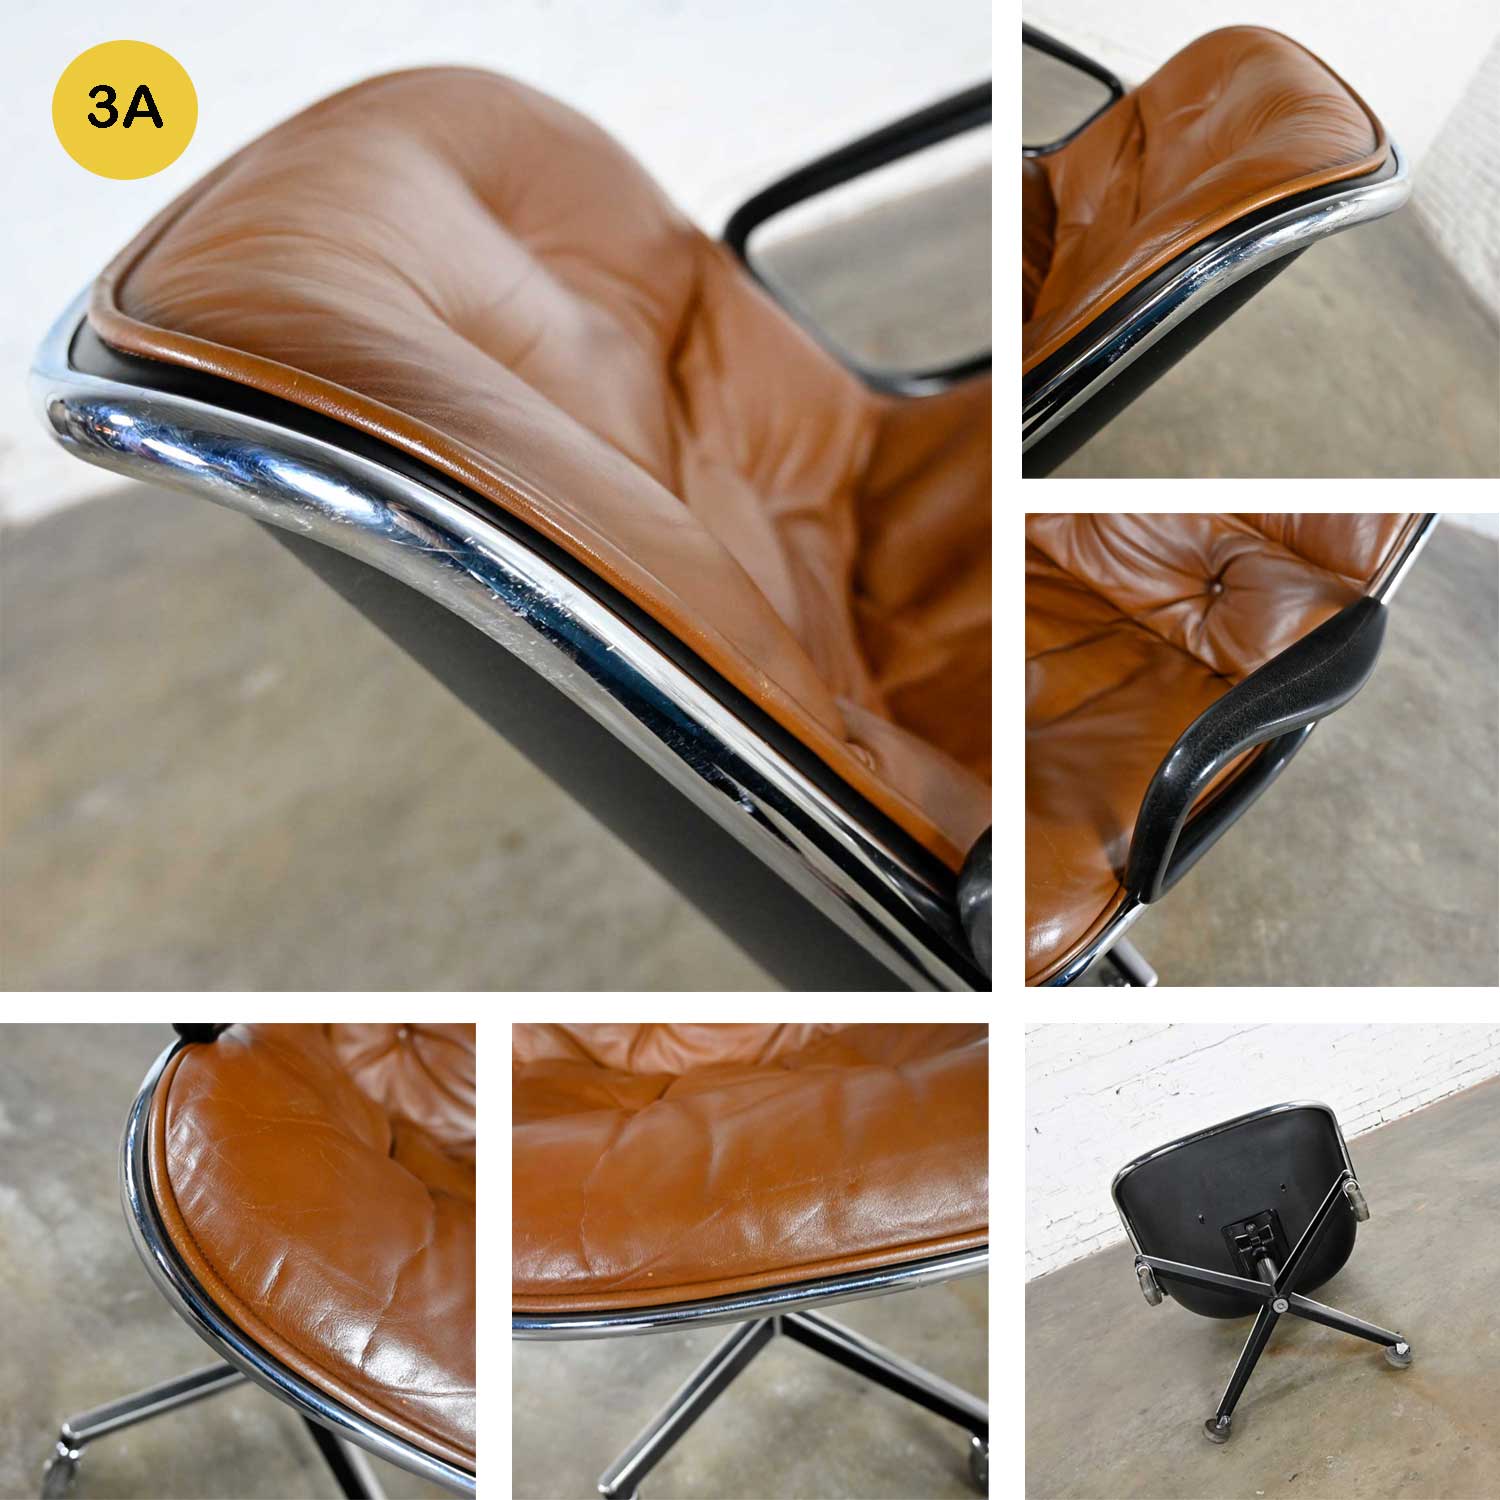 Executive Armchairs by Charles Pollock for Knoll Brown Leather with 4 Prong Base 6 Selling Separately